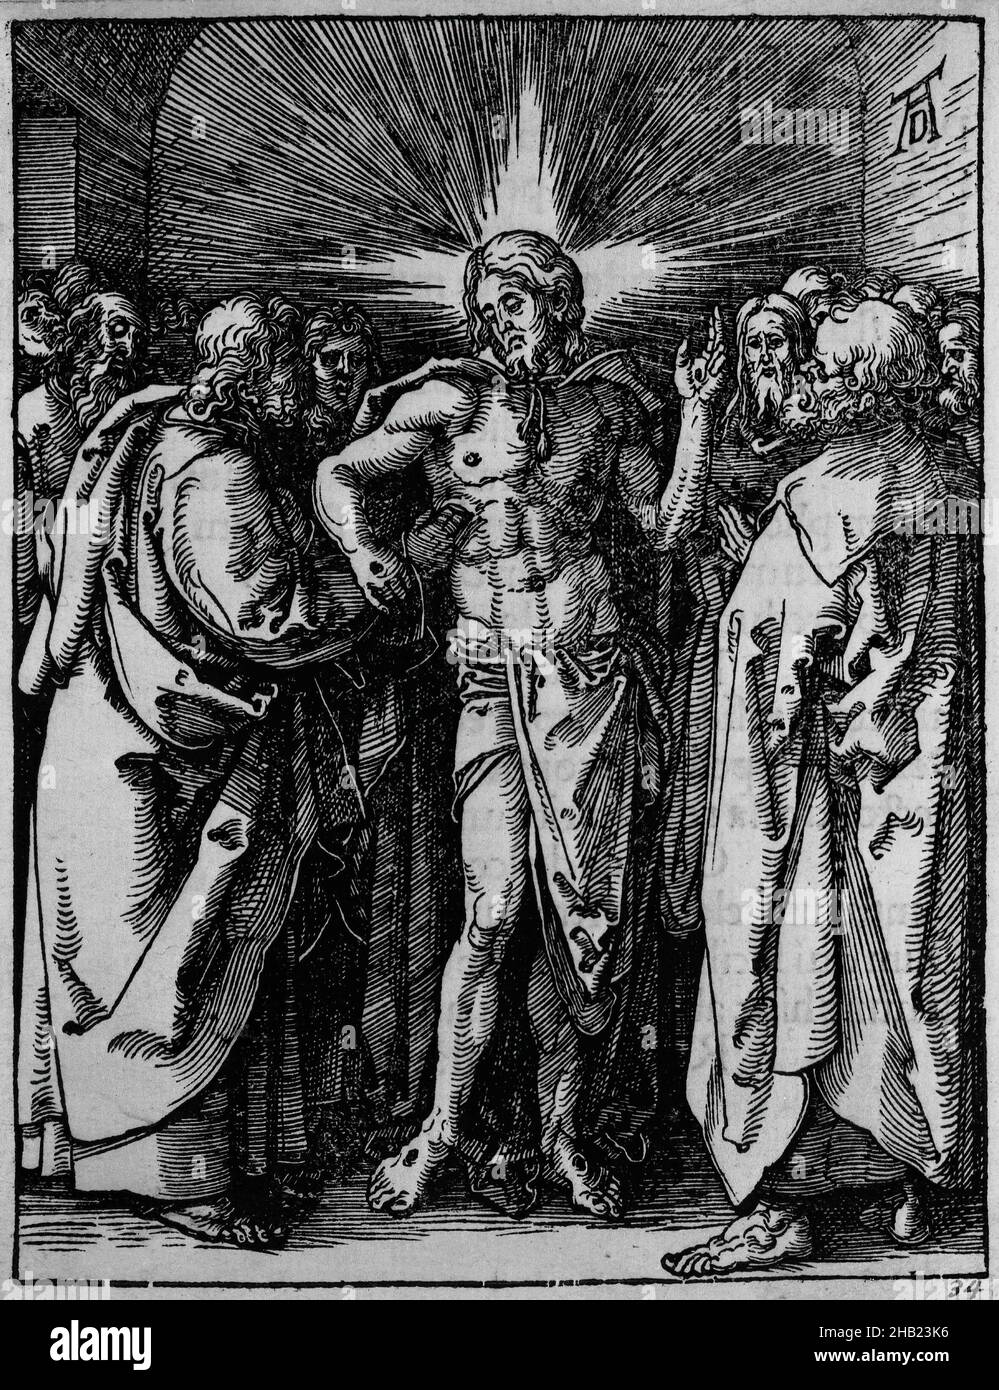 Doubting Thomas, The Small Passion, Albrecht Dürer, German, 1471-1528, Woodcut on laid paper, Germany, 1509-1511; edition of 1511, Image: 5 x 3 3/4 in., 12.7 x 9.5 cm, Christ, Doubting Thomas, Durer, Small Passion, woodcut Stock Photo